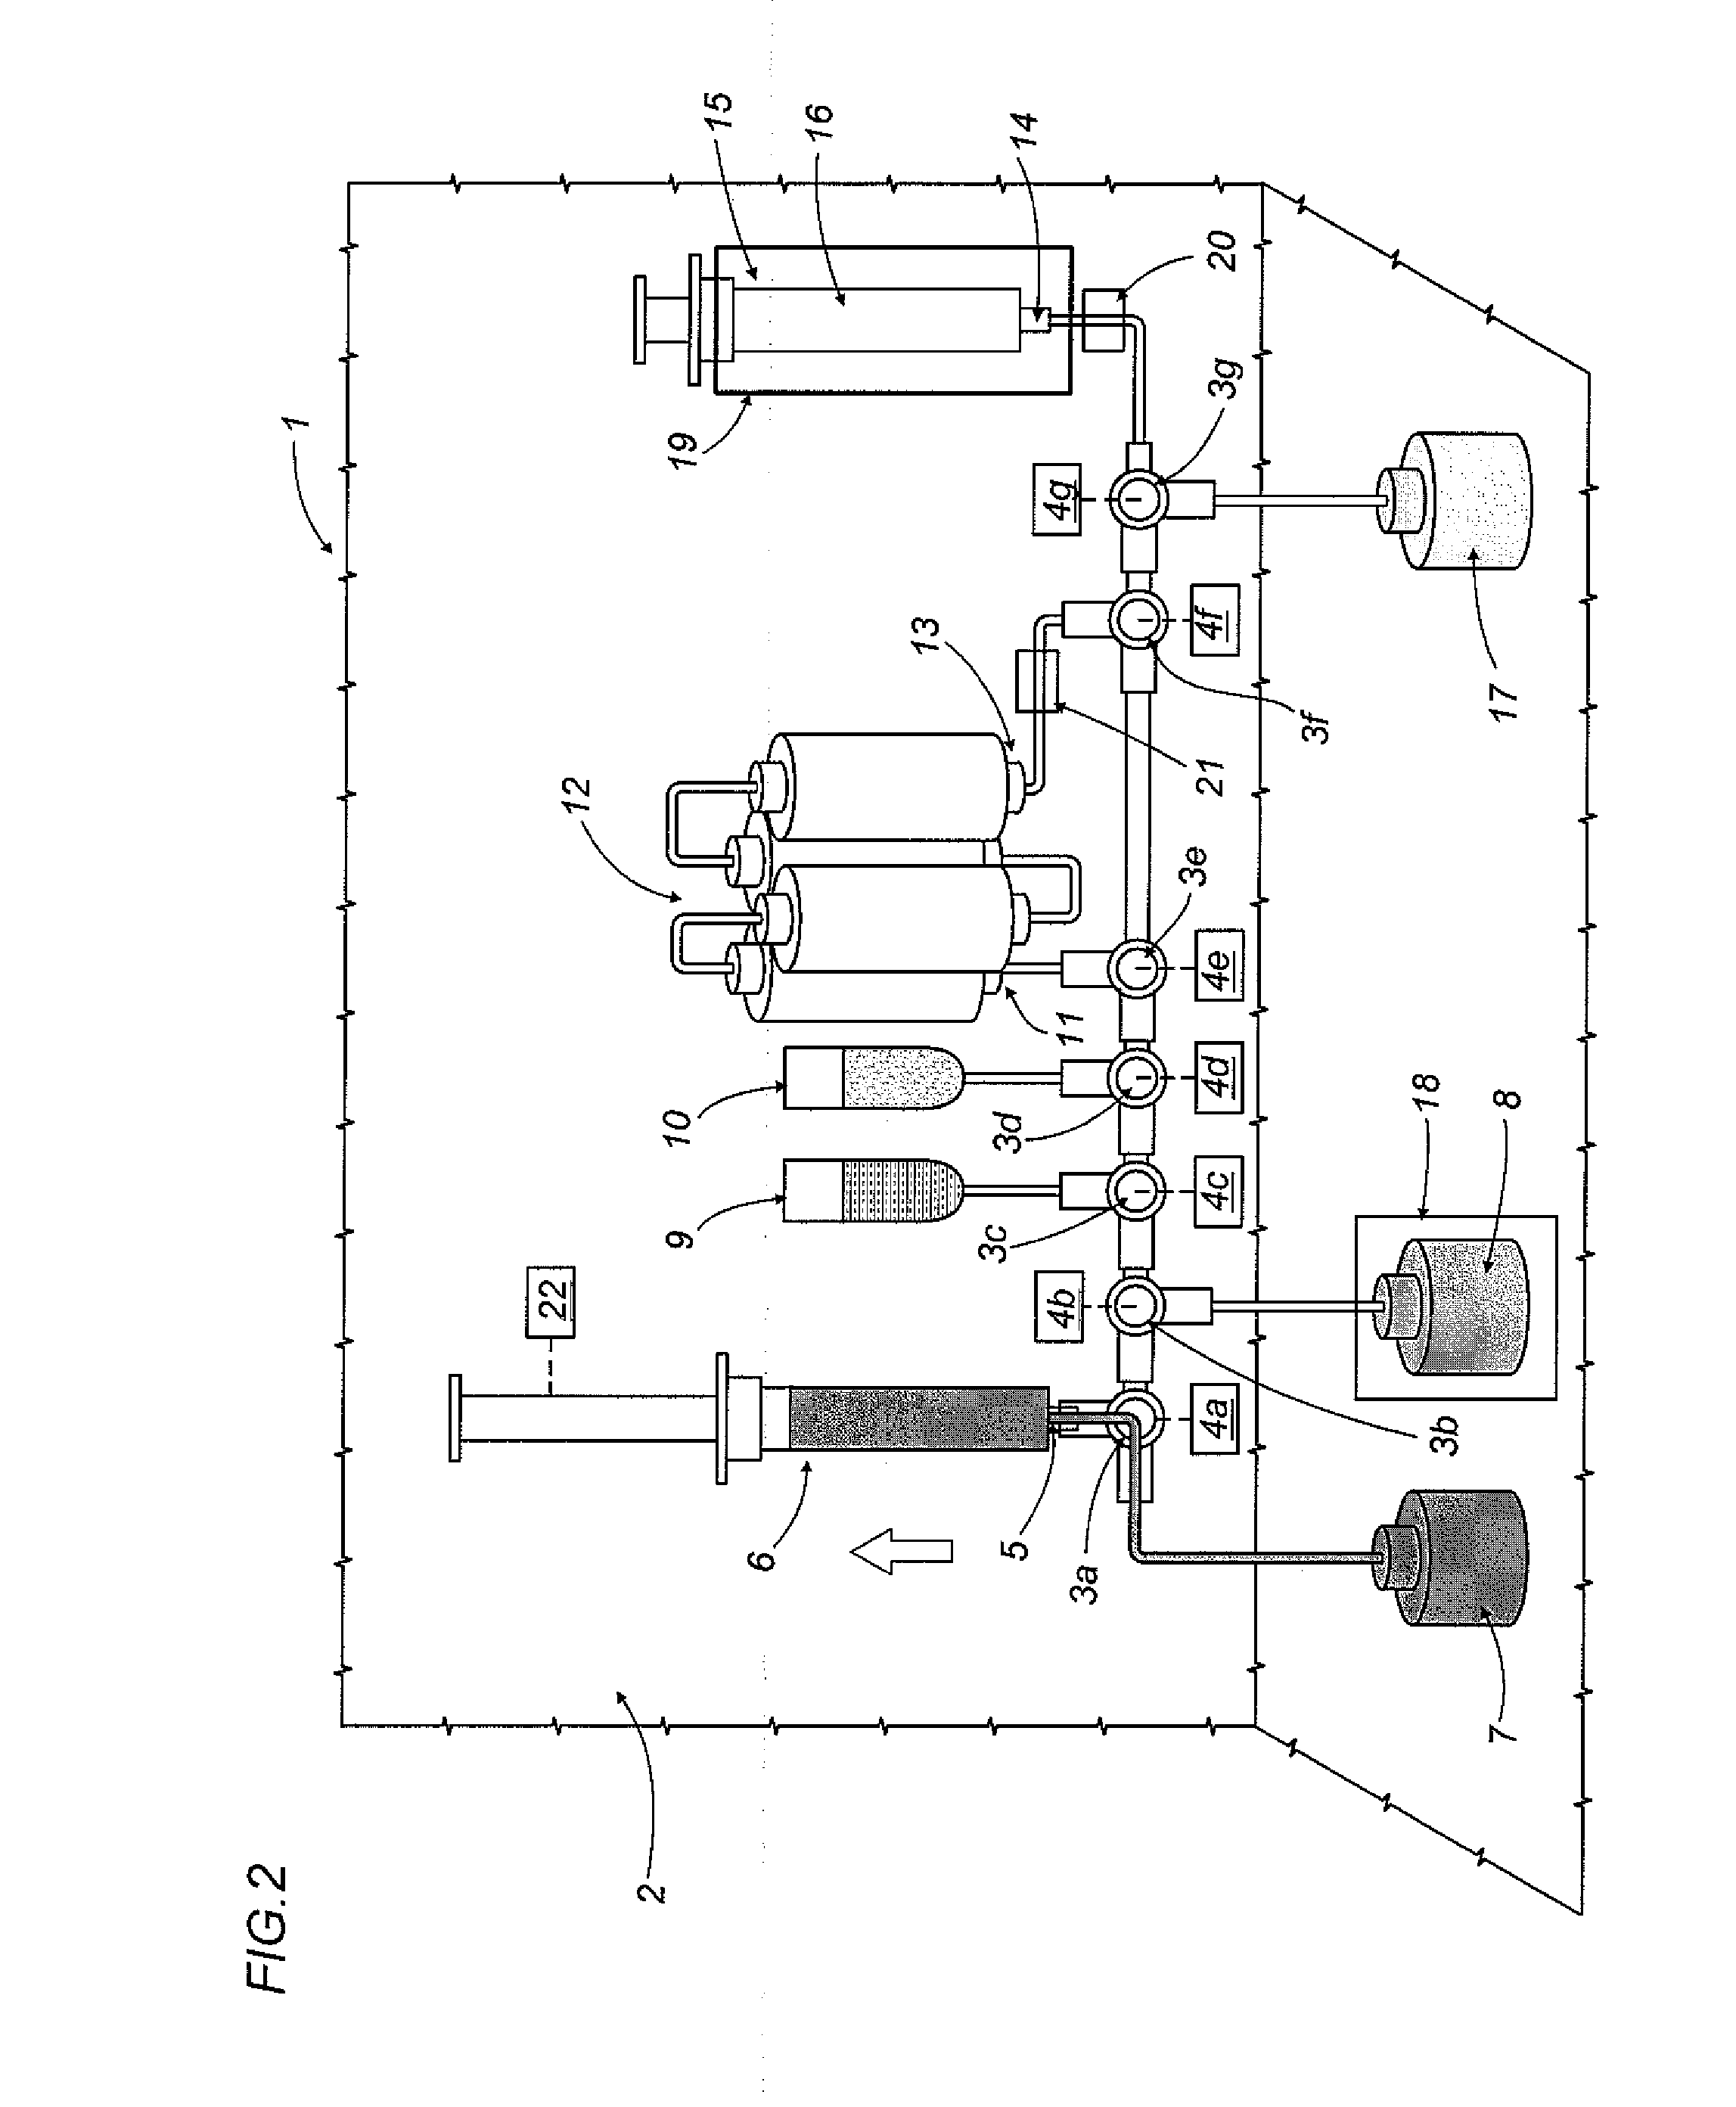 Apparatus and method for preparing medicines containing radioactive substances